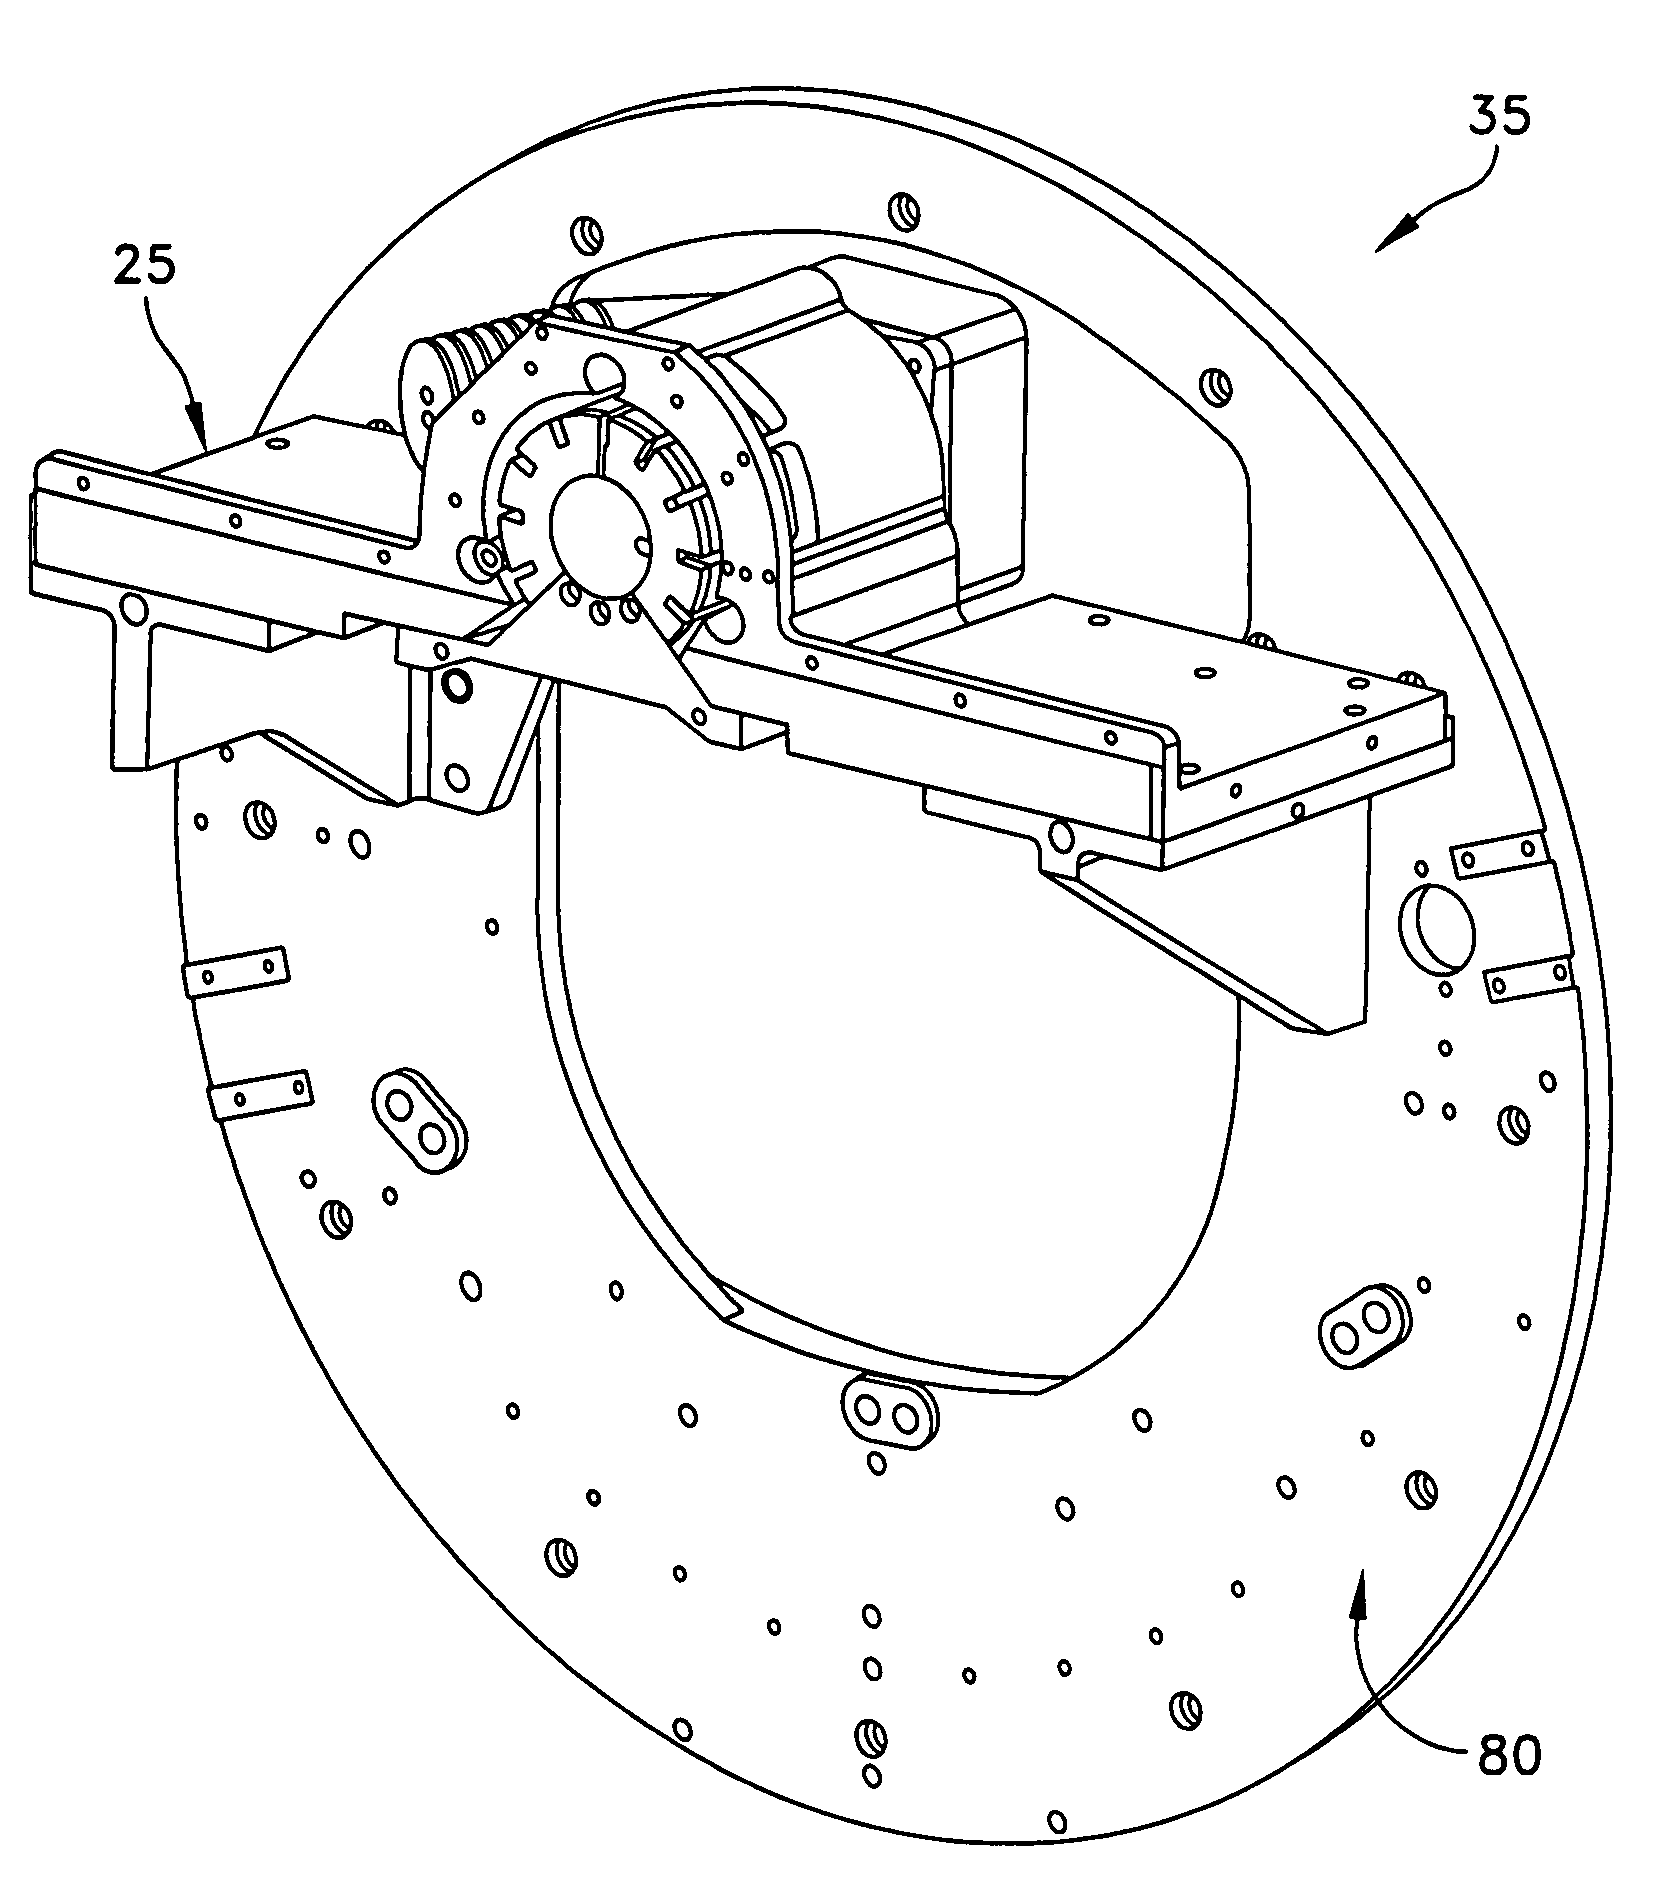 Computerized tomography (CT) imaging system with monoblock X-ray tube assembly